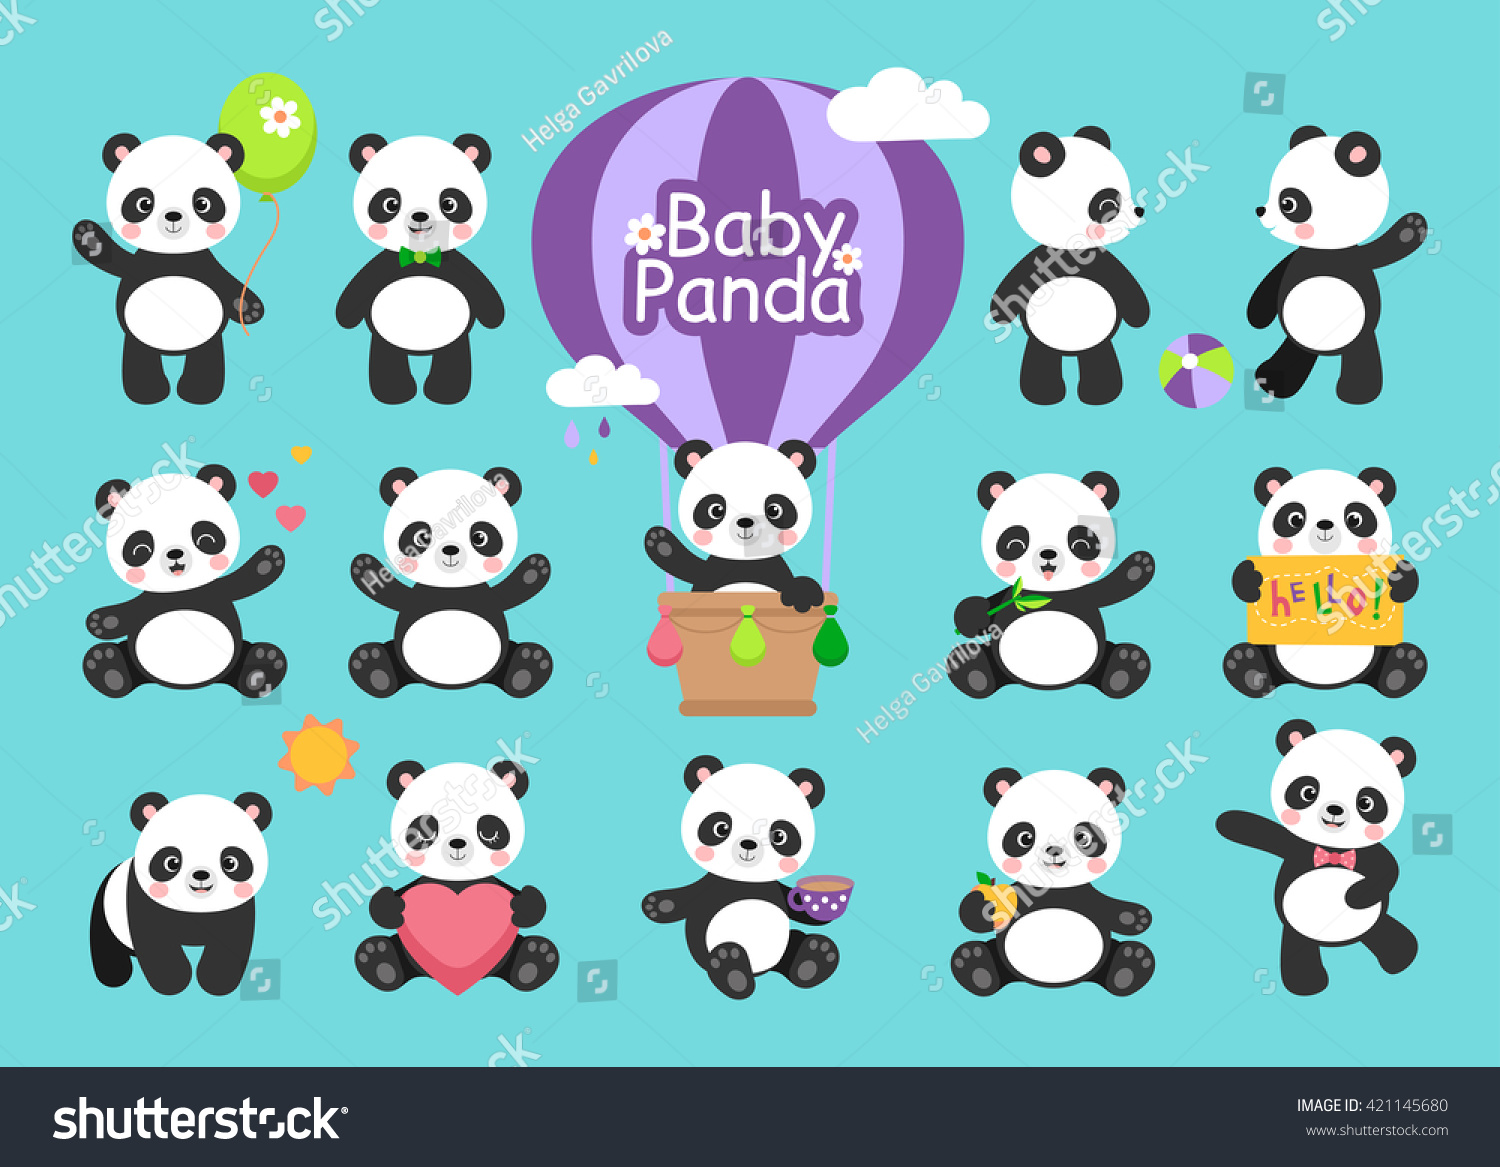 SVG of Cute baby panda in various expression and positions in cartoon style.  svg